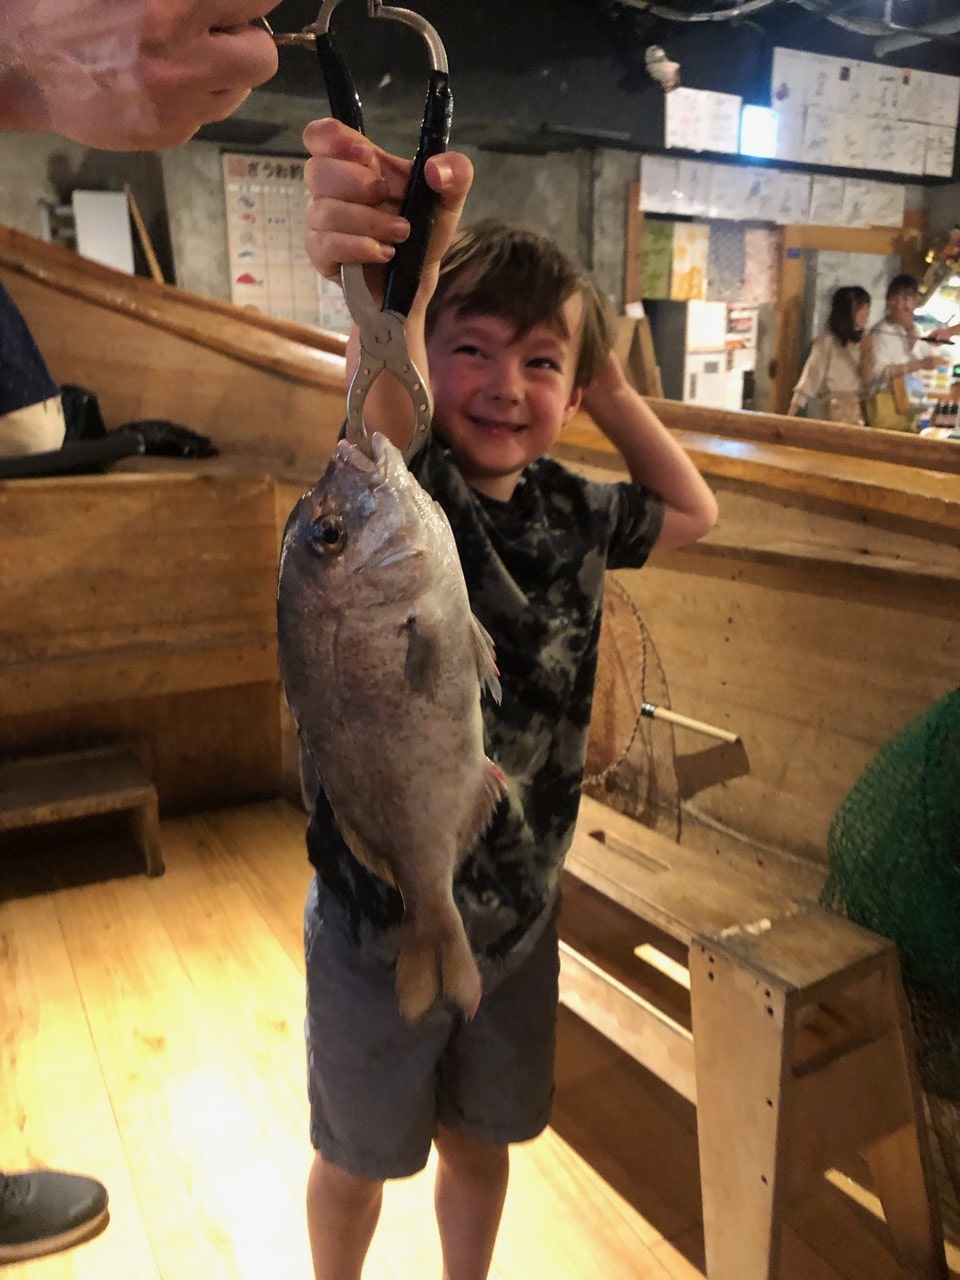 CATCH YOUR OWN FISH FOR DINNER … IN A RESTAURANT ( A GUEST POST BY MELISSA BERTLING )